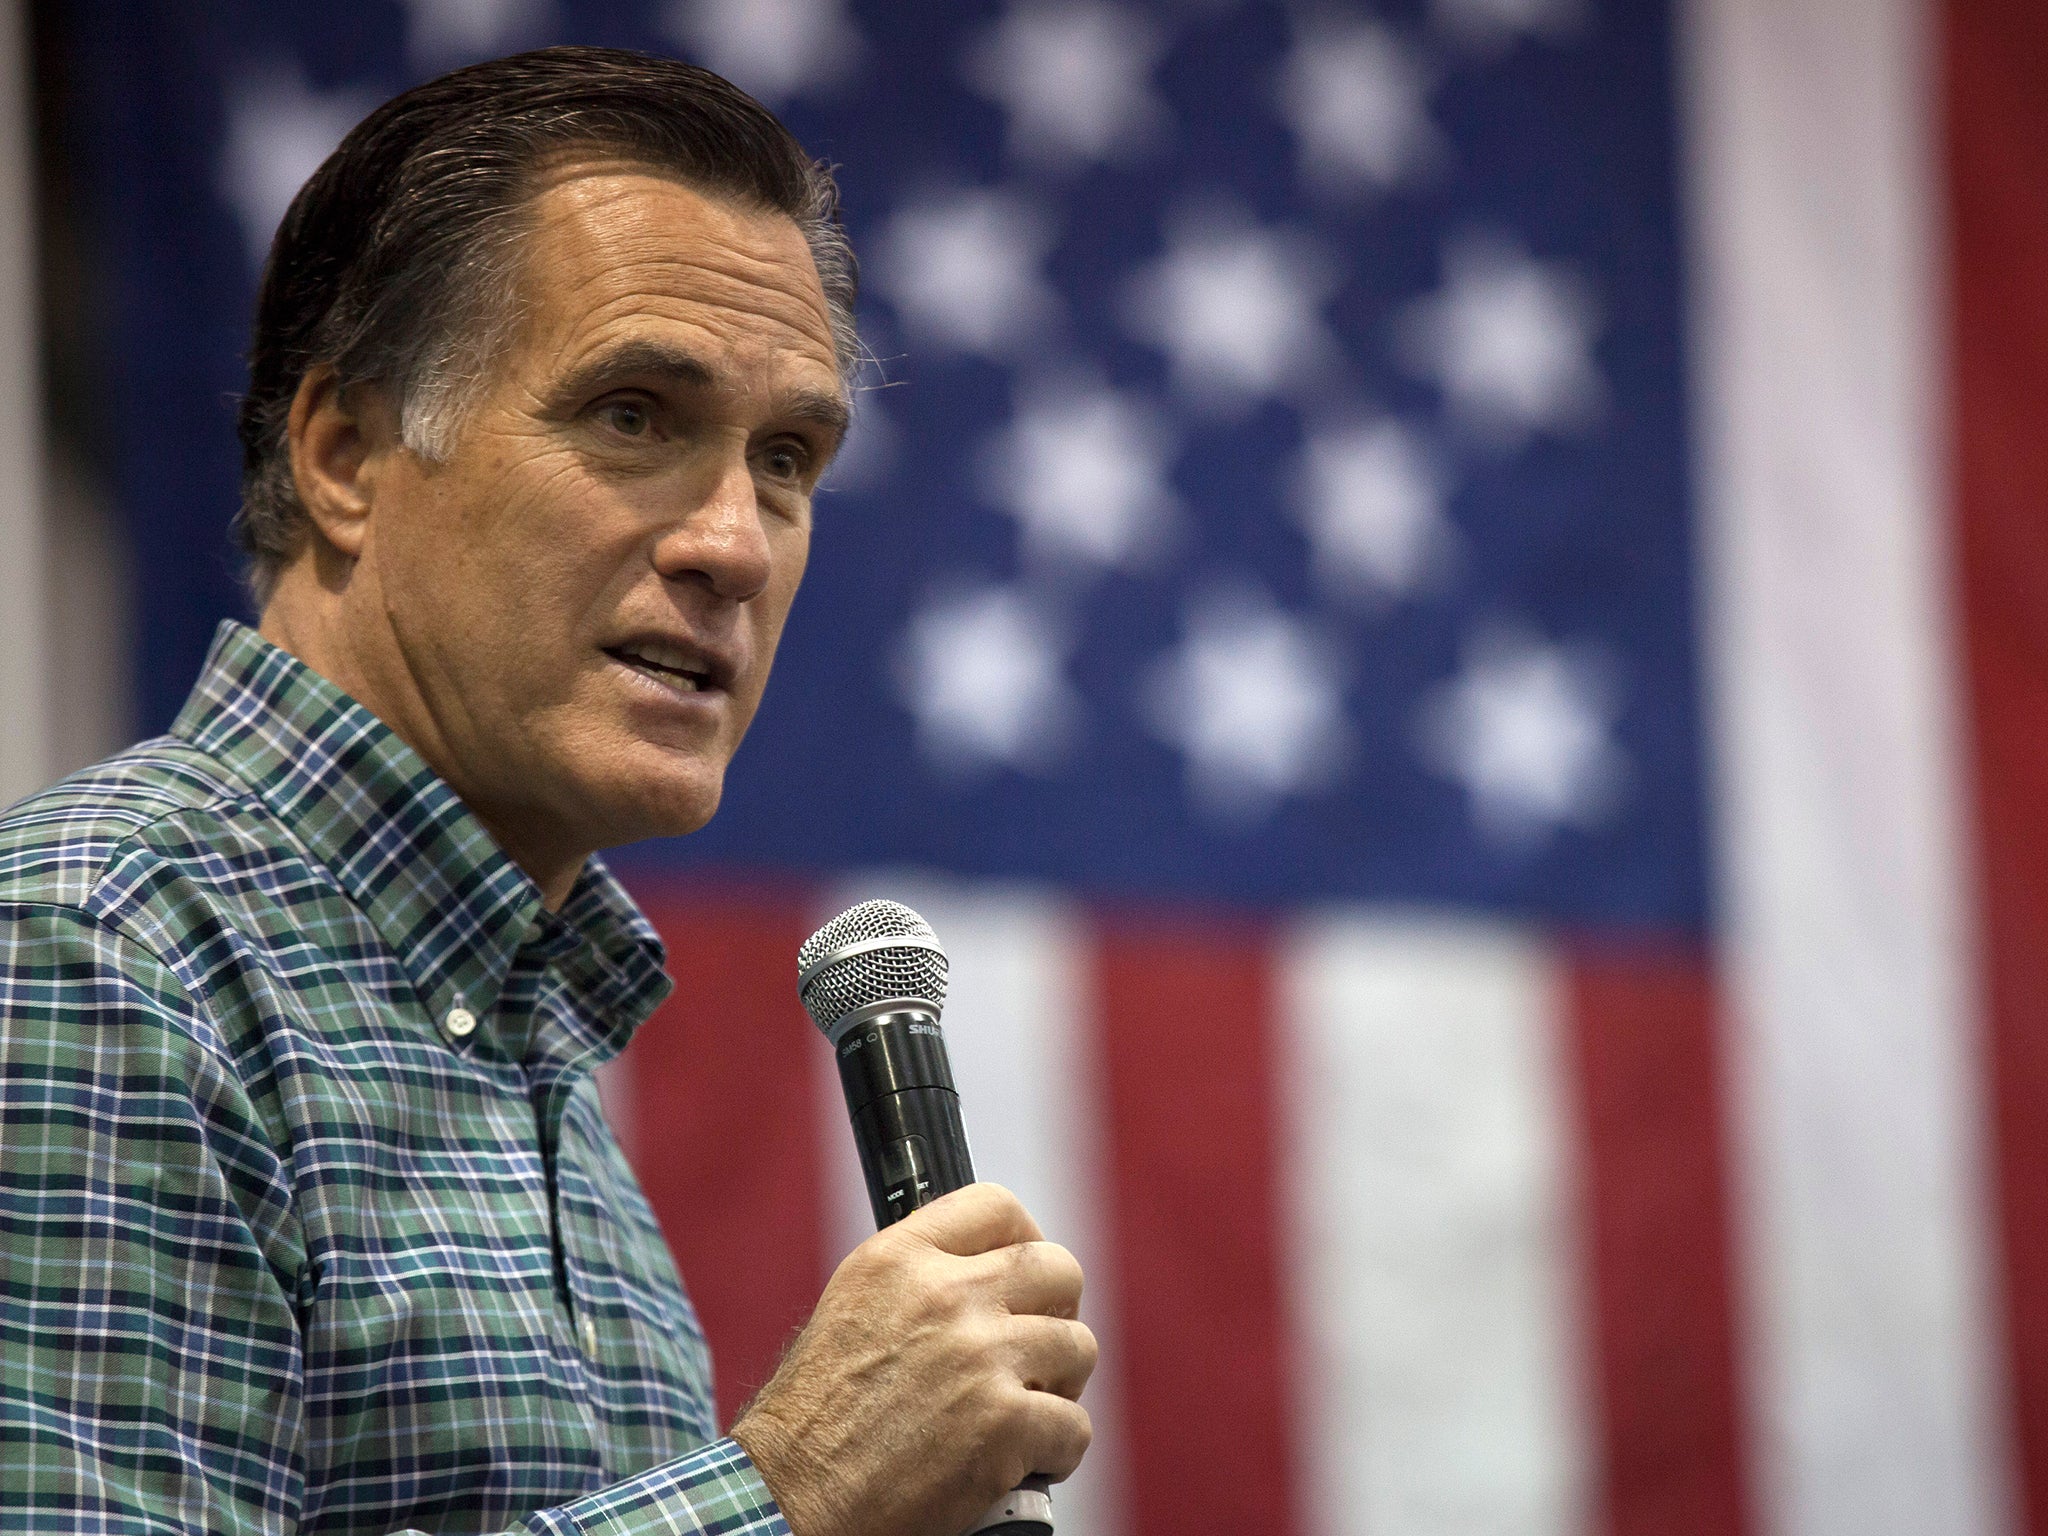 Mitt Romney is just one of a number of frontrunners to lead the Republican party in the next US election